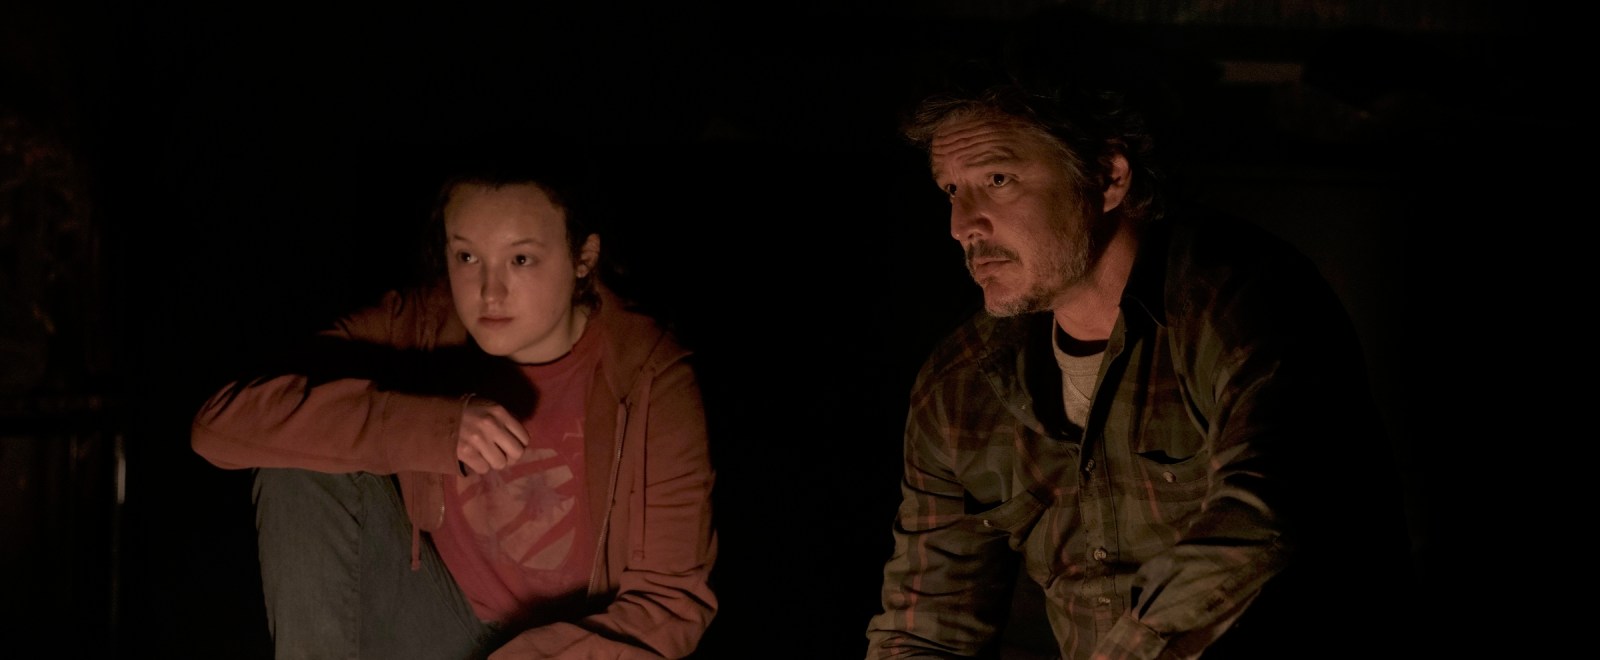 The Last Of Us Finale Was Brutal, So Watch The Cast Have Fun